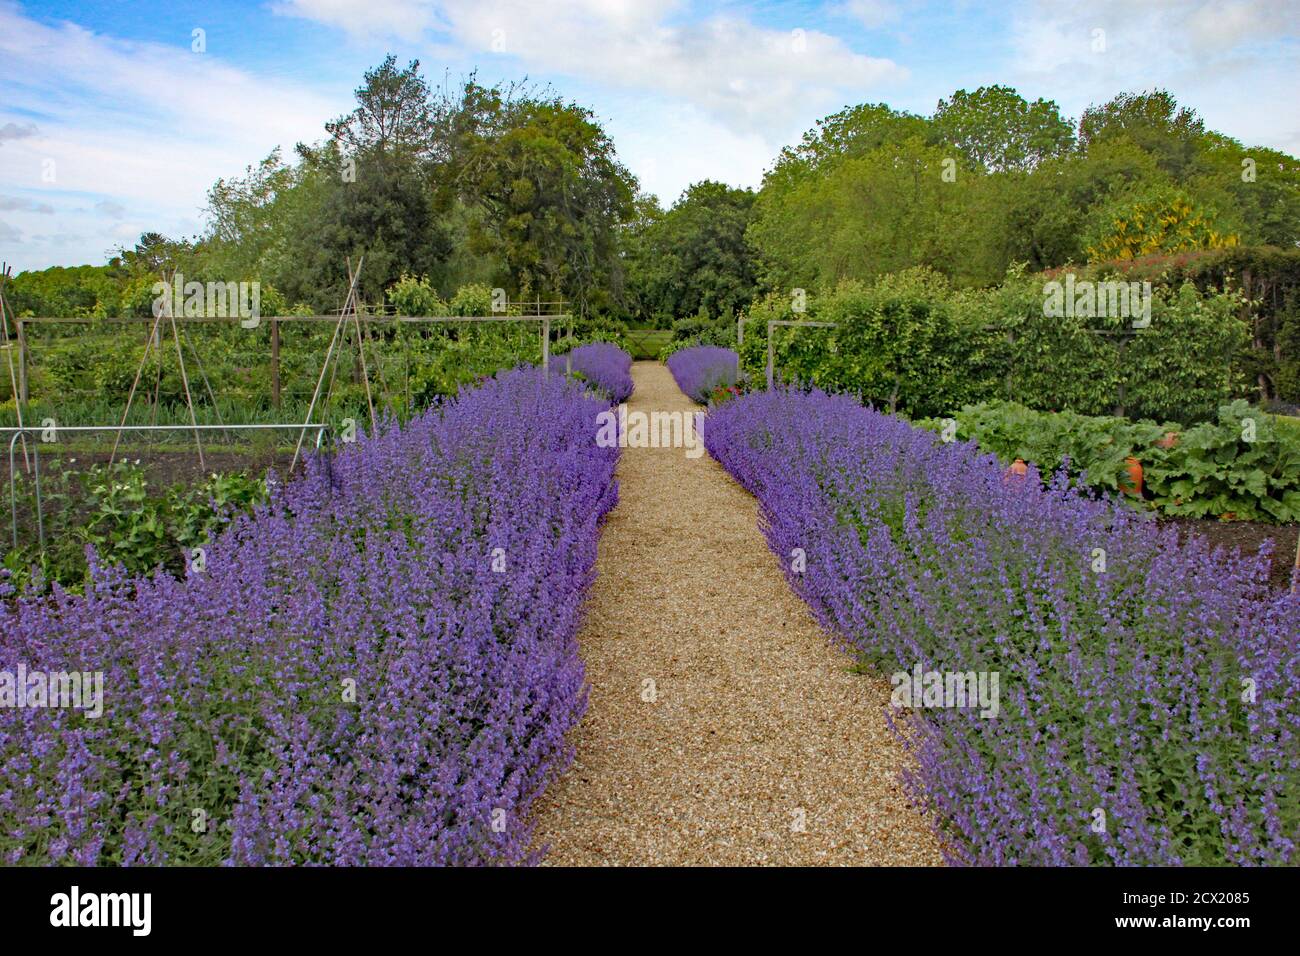 Two rows of lavender either side of a gravel pathway form a border to a kitchen garden. Stock Photo